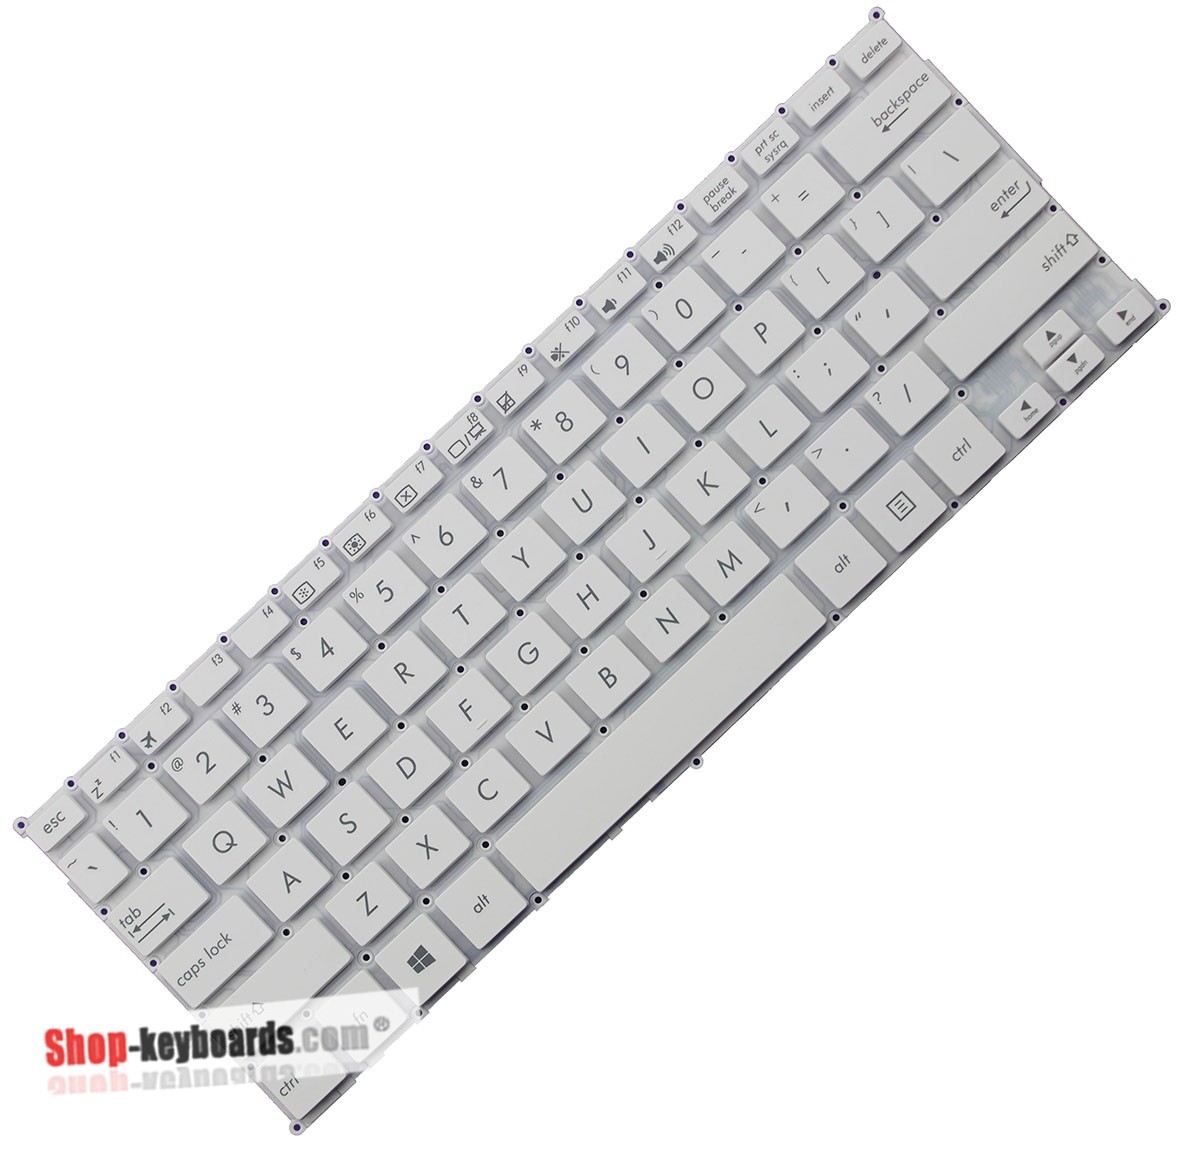 Asus 0KNB0-1128ND00 Keyboard replacement